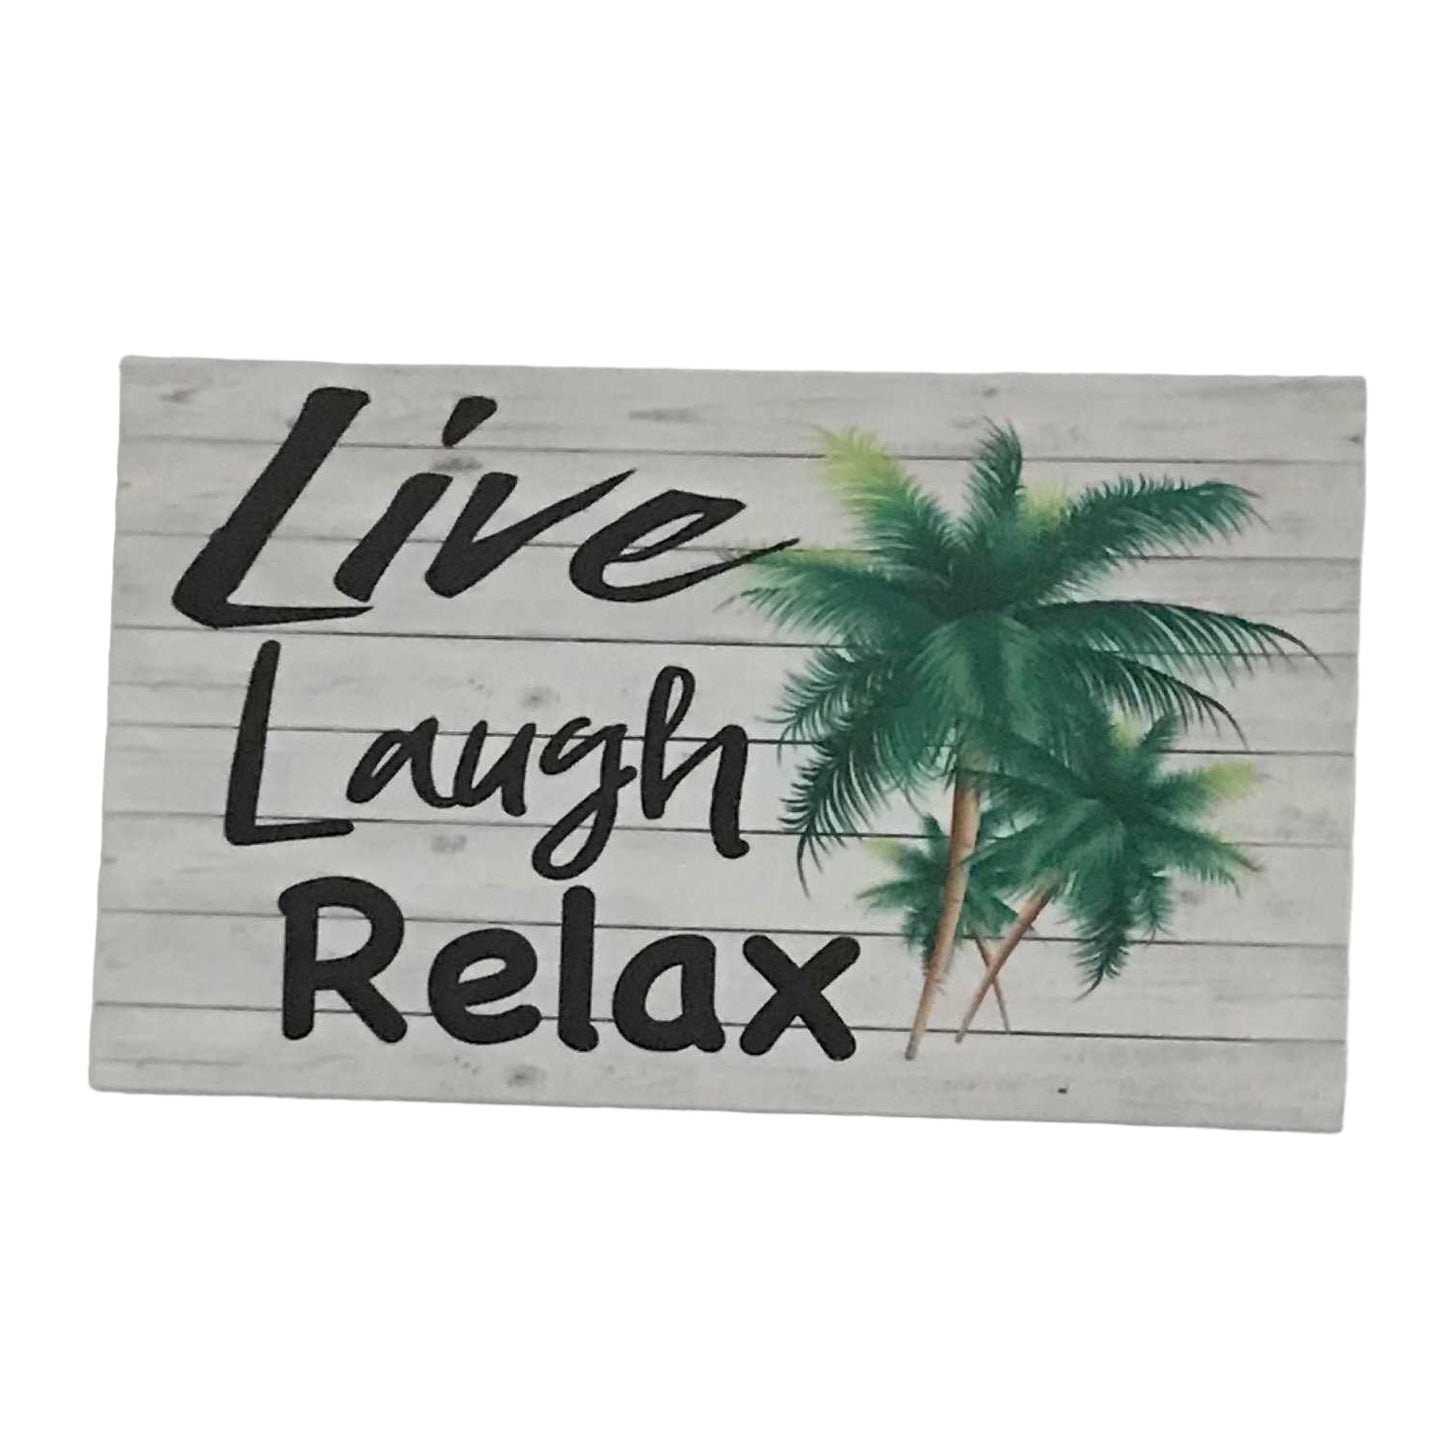 Live Laugh Relax with Palm Trees Sign - The Renmy Store Homewares & Gifts 